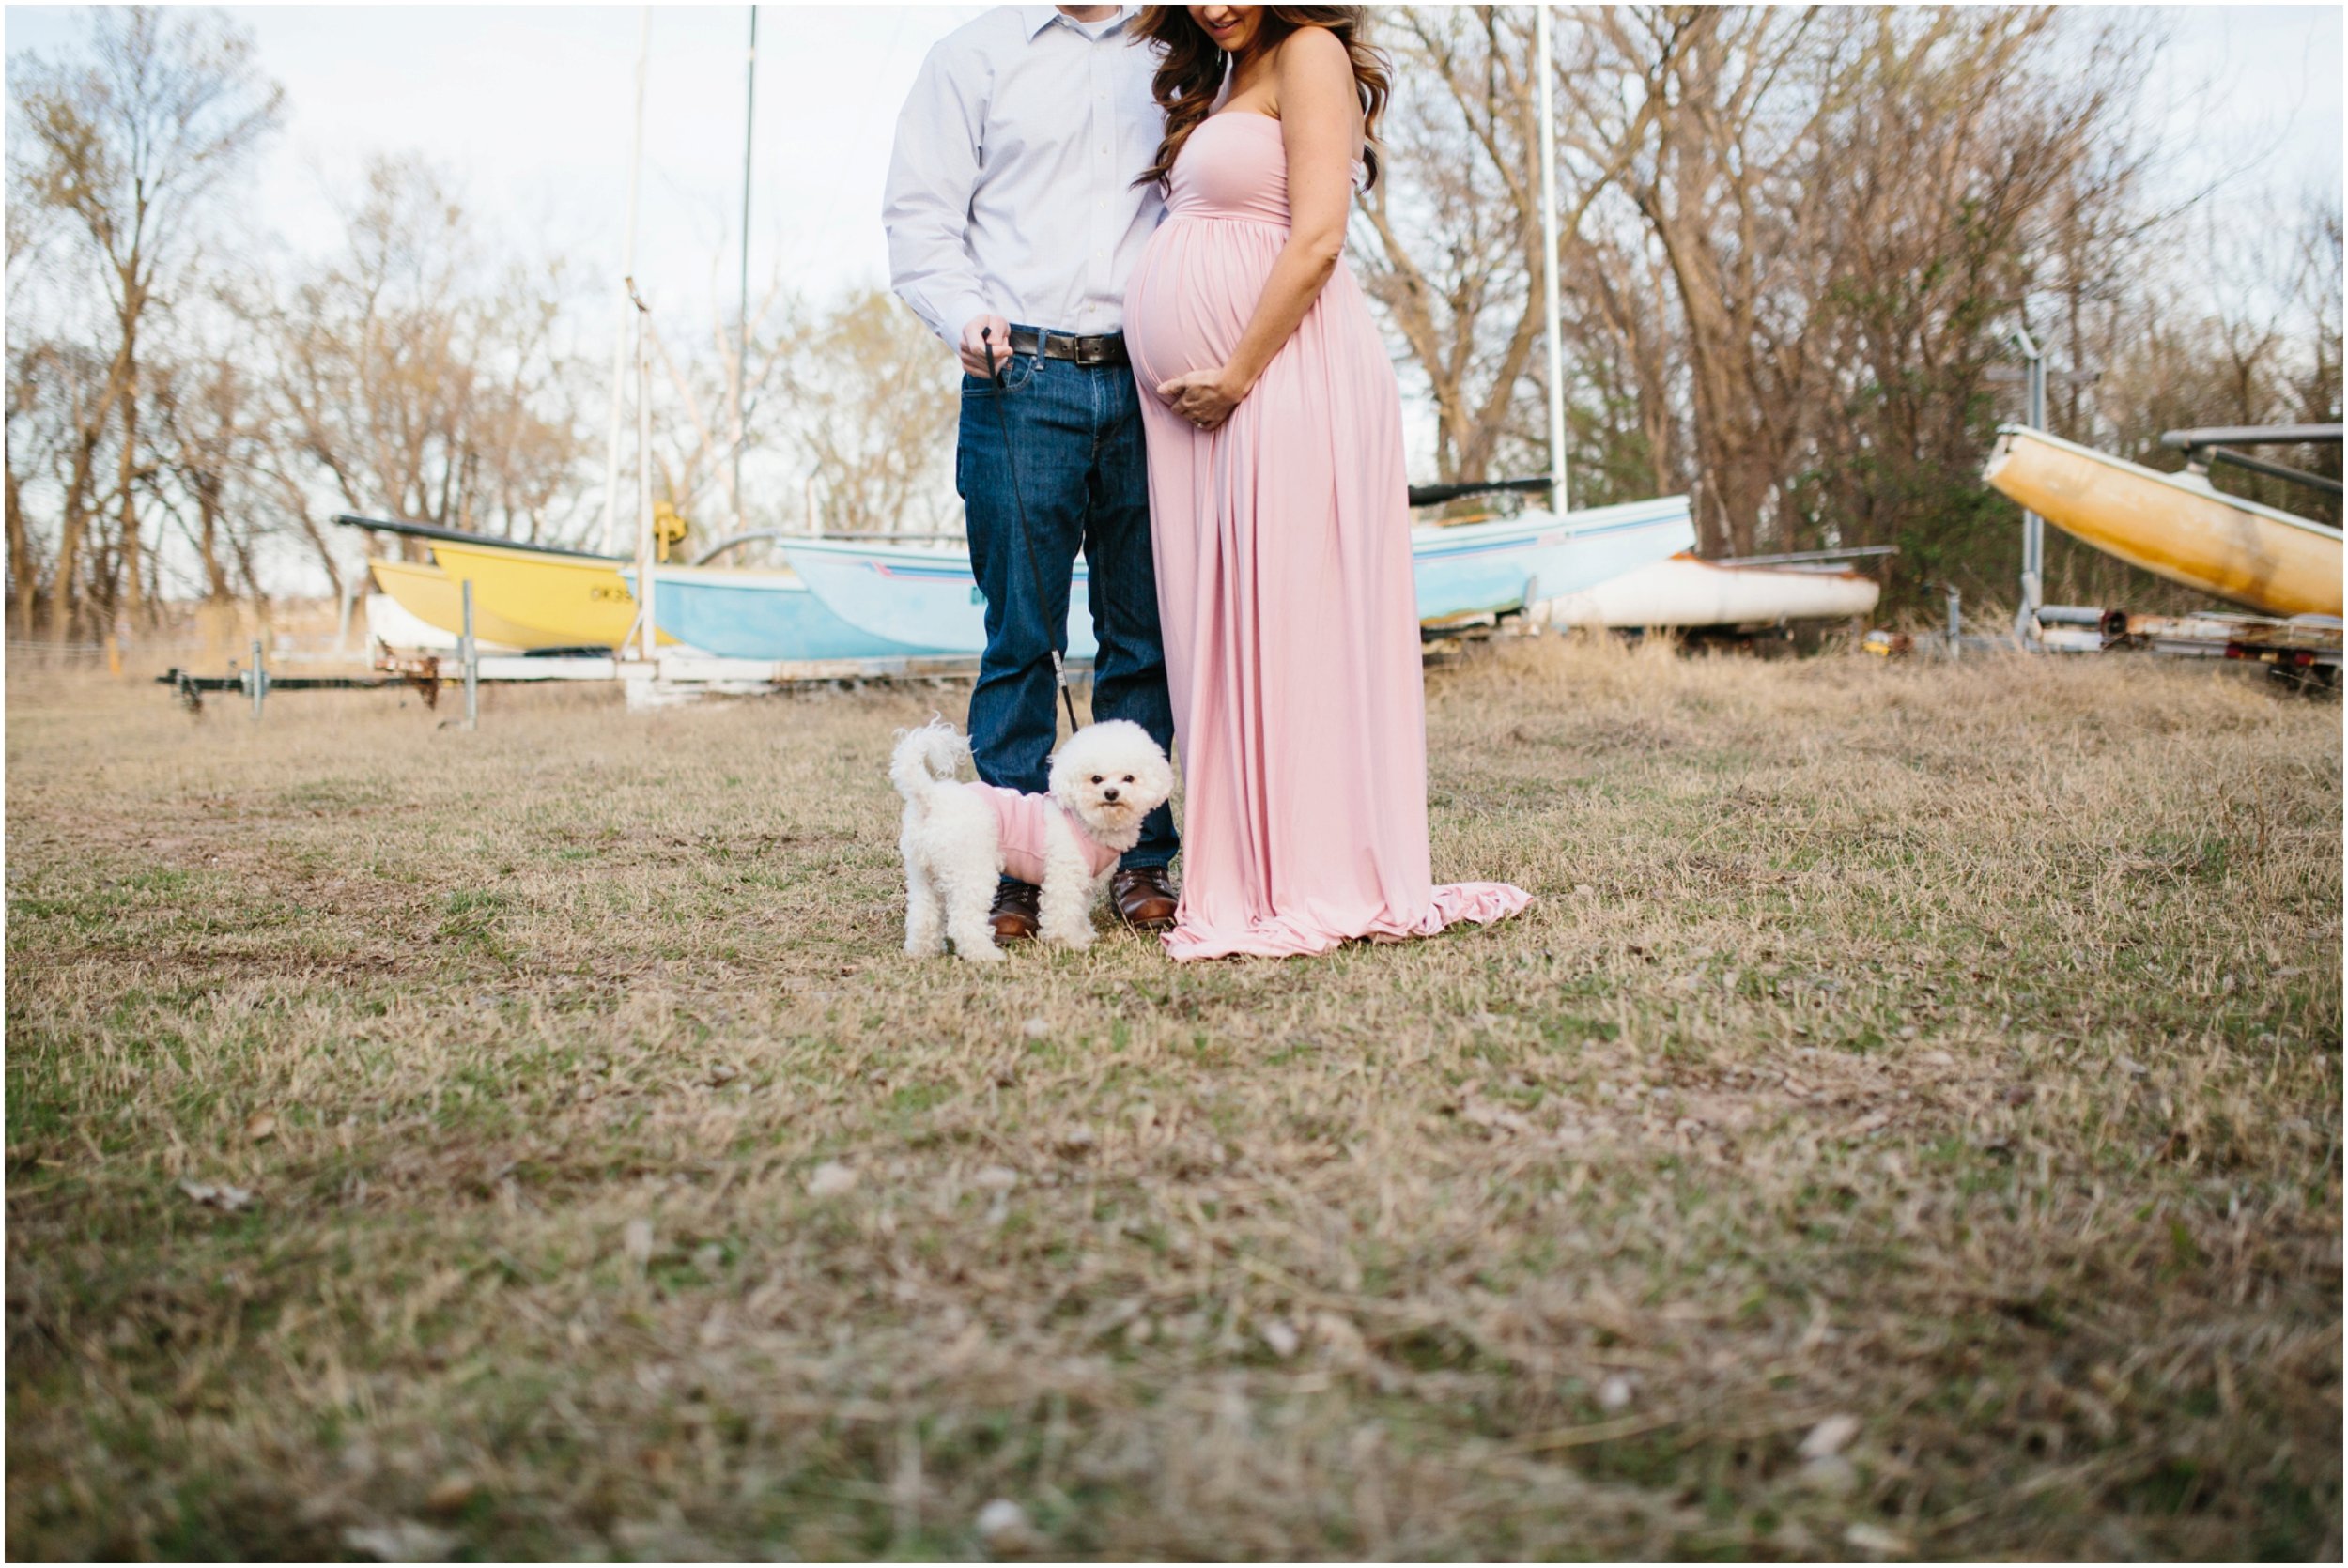 couples pregnancy photos with dog by blue and yellow sailboats in okc